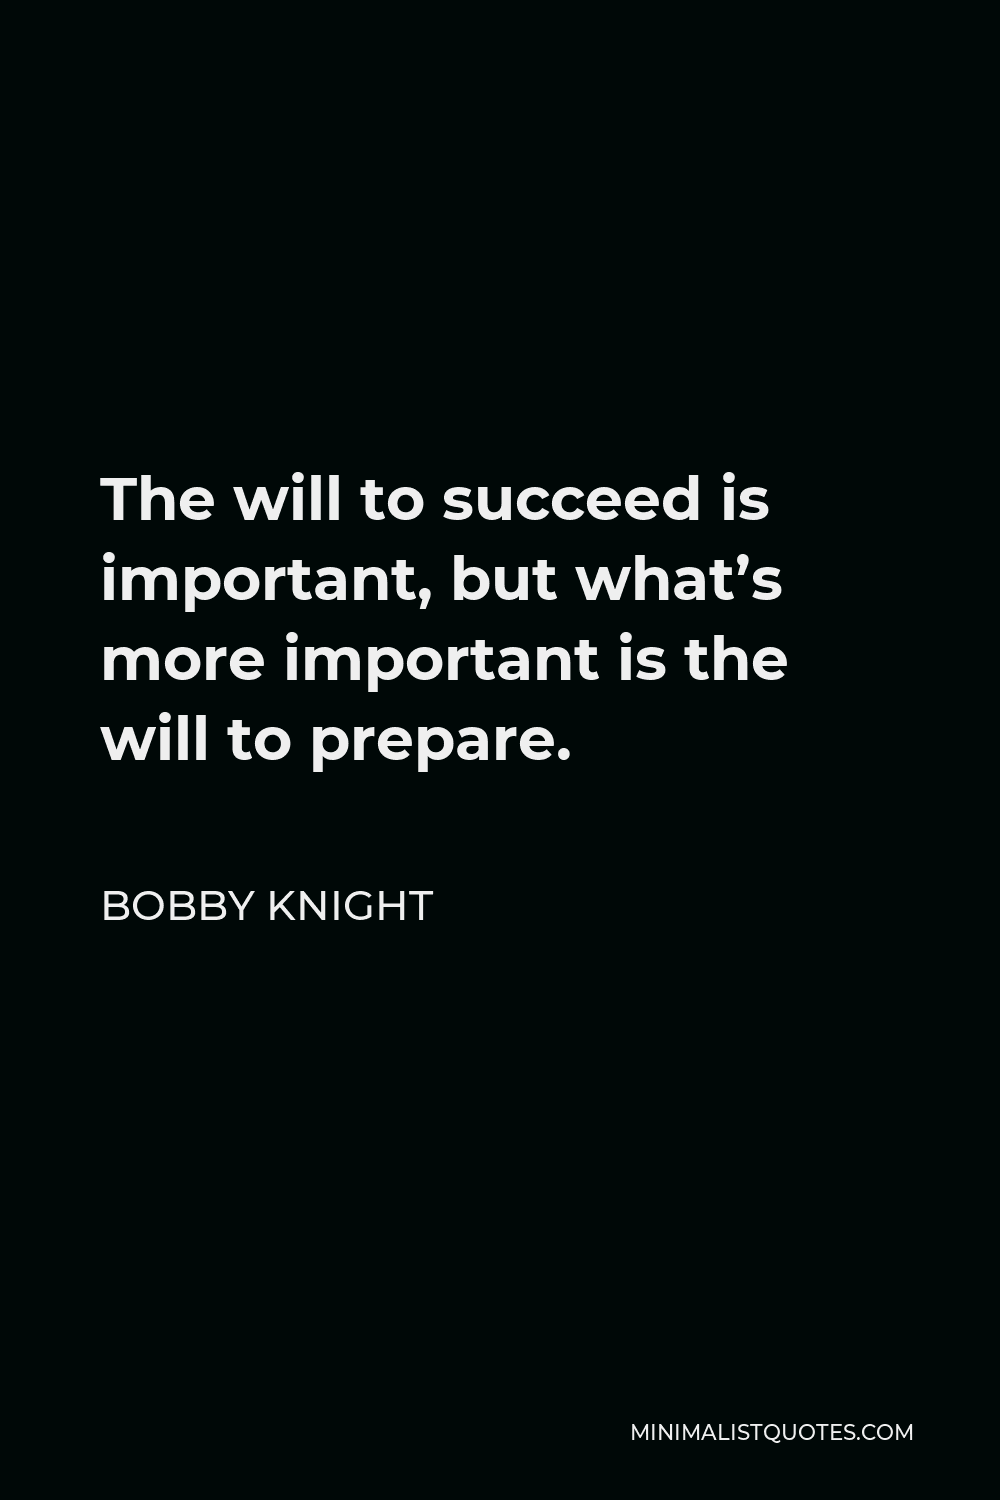 Bobby Knight Quote - The will to succeed is important, but what’s more important is the will to prepare.